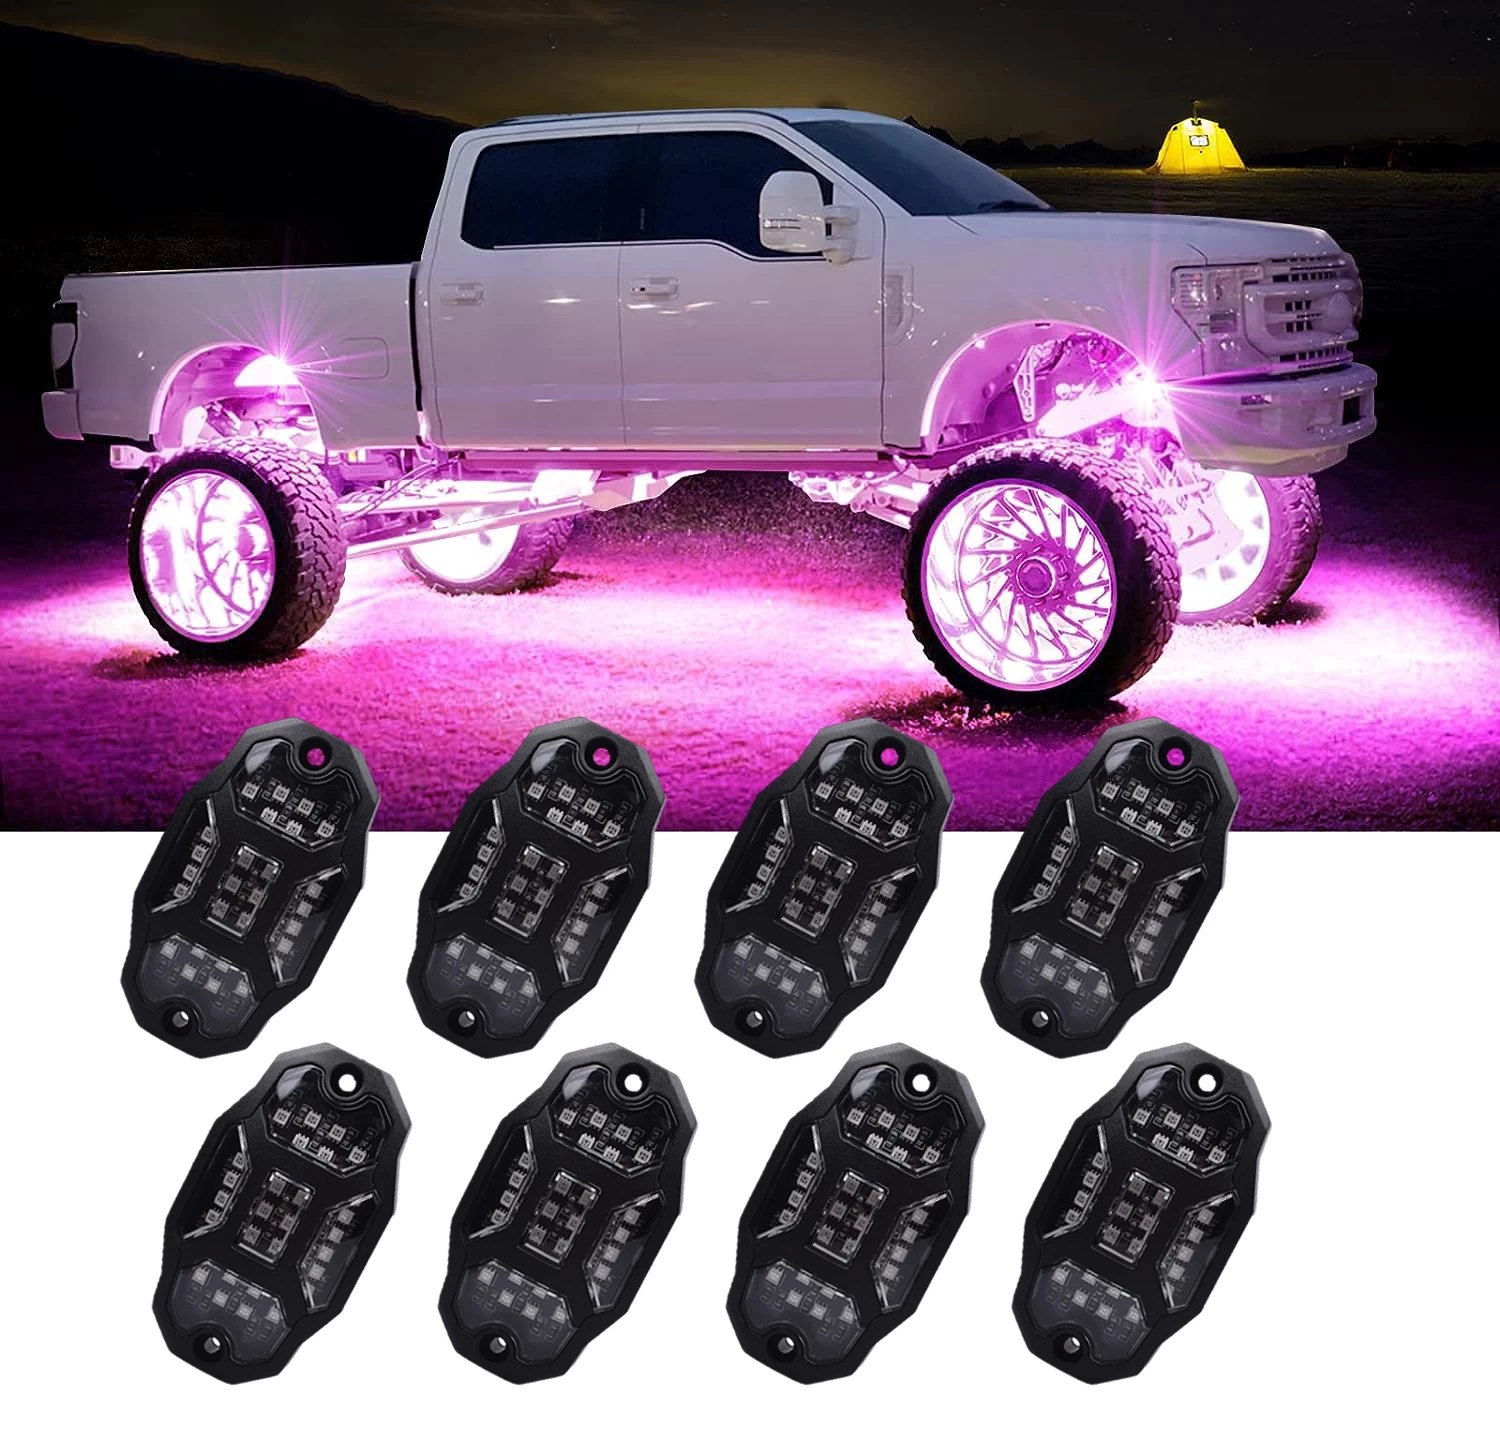 Chiny Undergolw Light For Car Jeep Off-Road Truck Boat Bluetooth APP Control 4/6/8 In 1 RGB LED Rock Lights Chassis Light Music Sync - COPY - bav4w2 producent